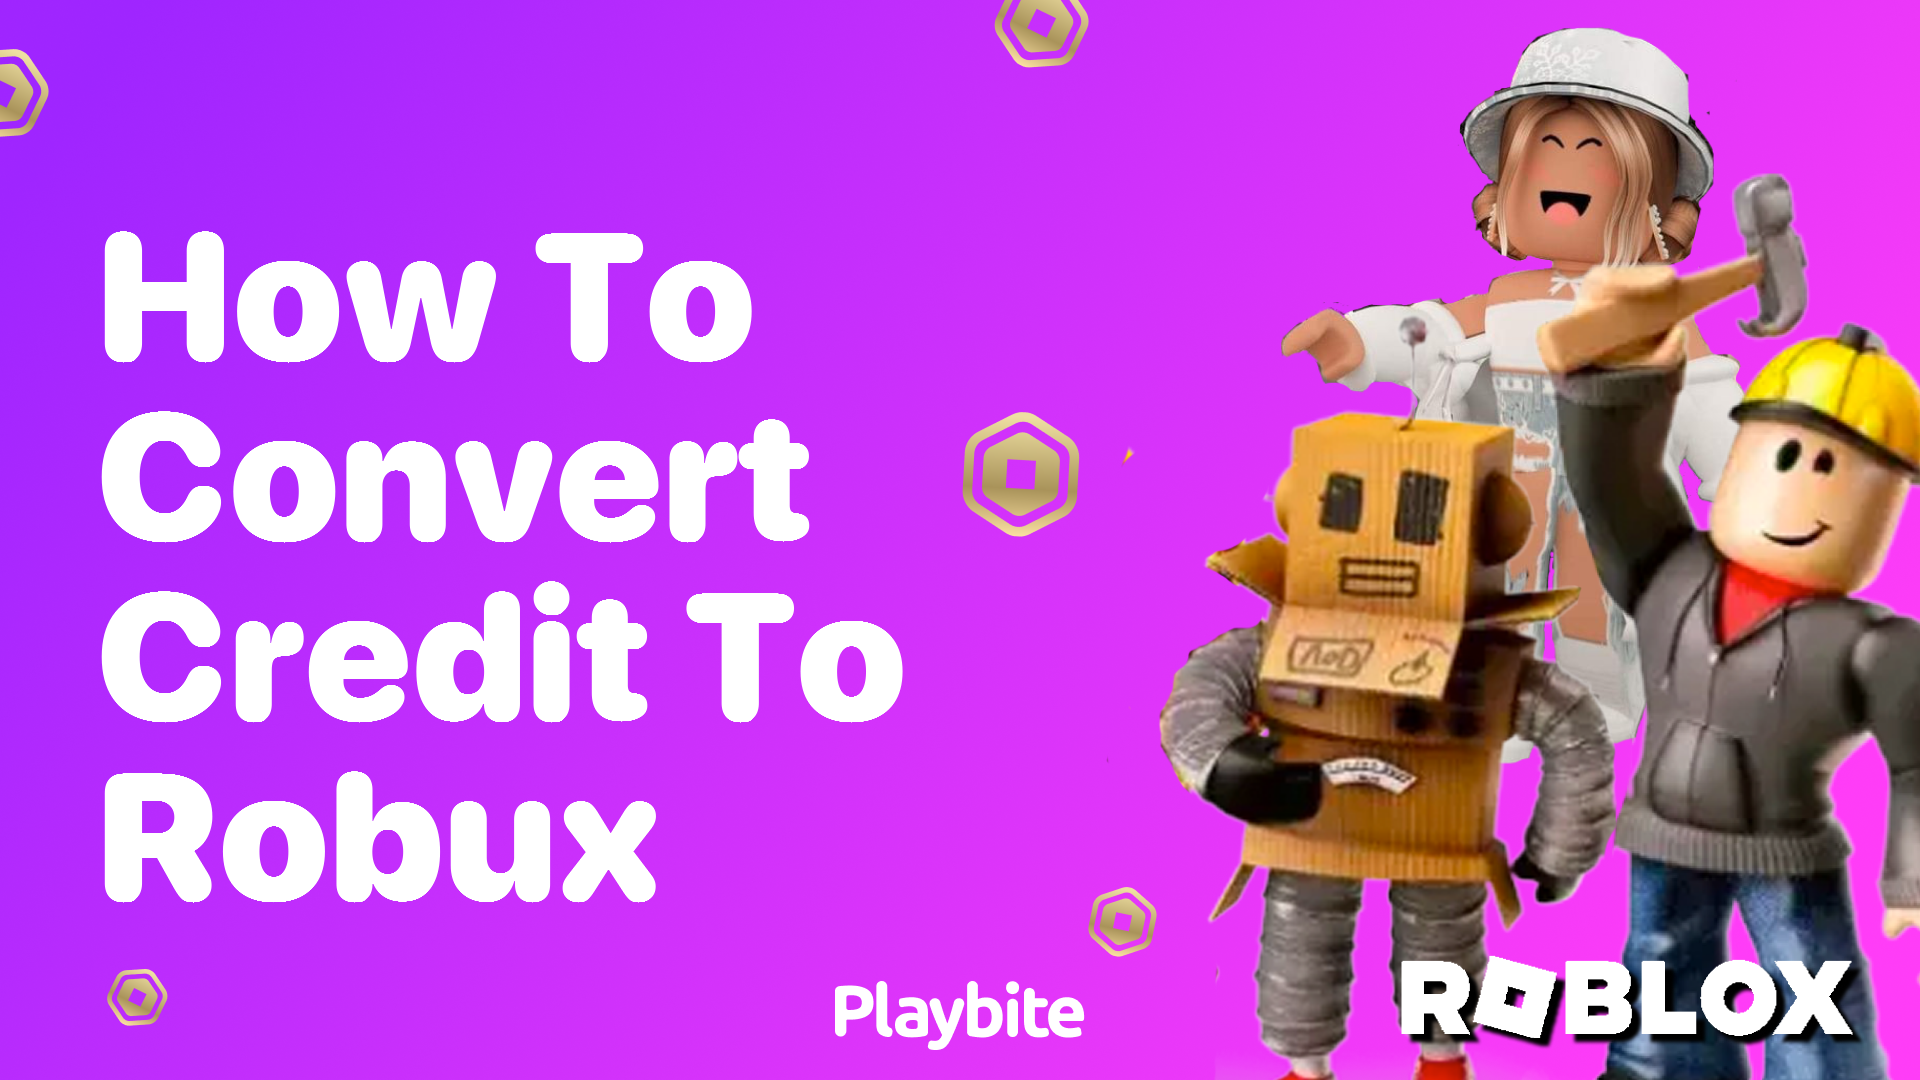 How to Convert Credit to Robux: A Quick Guide